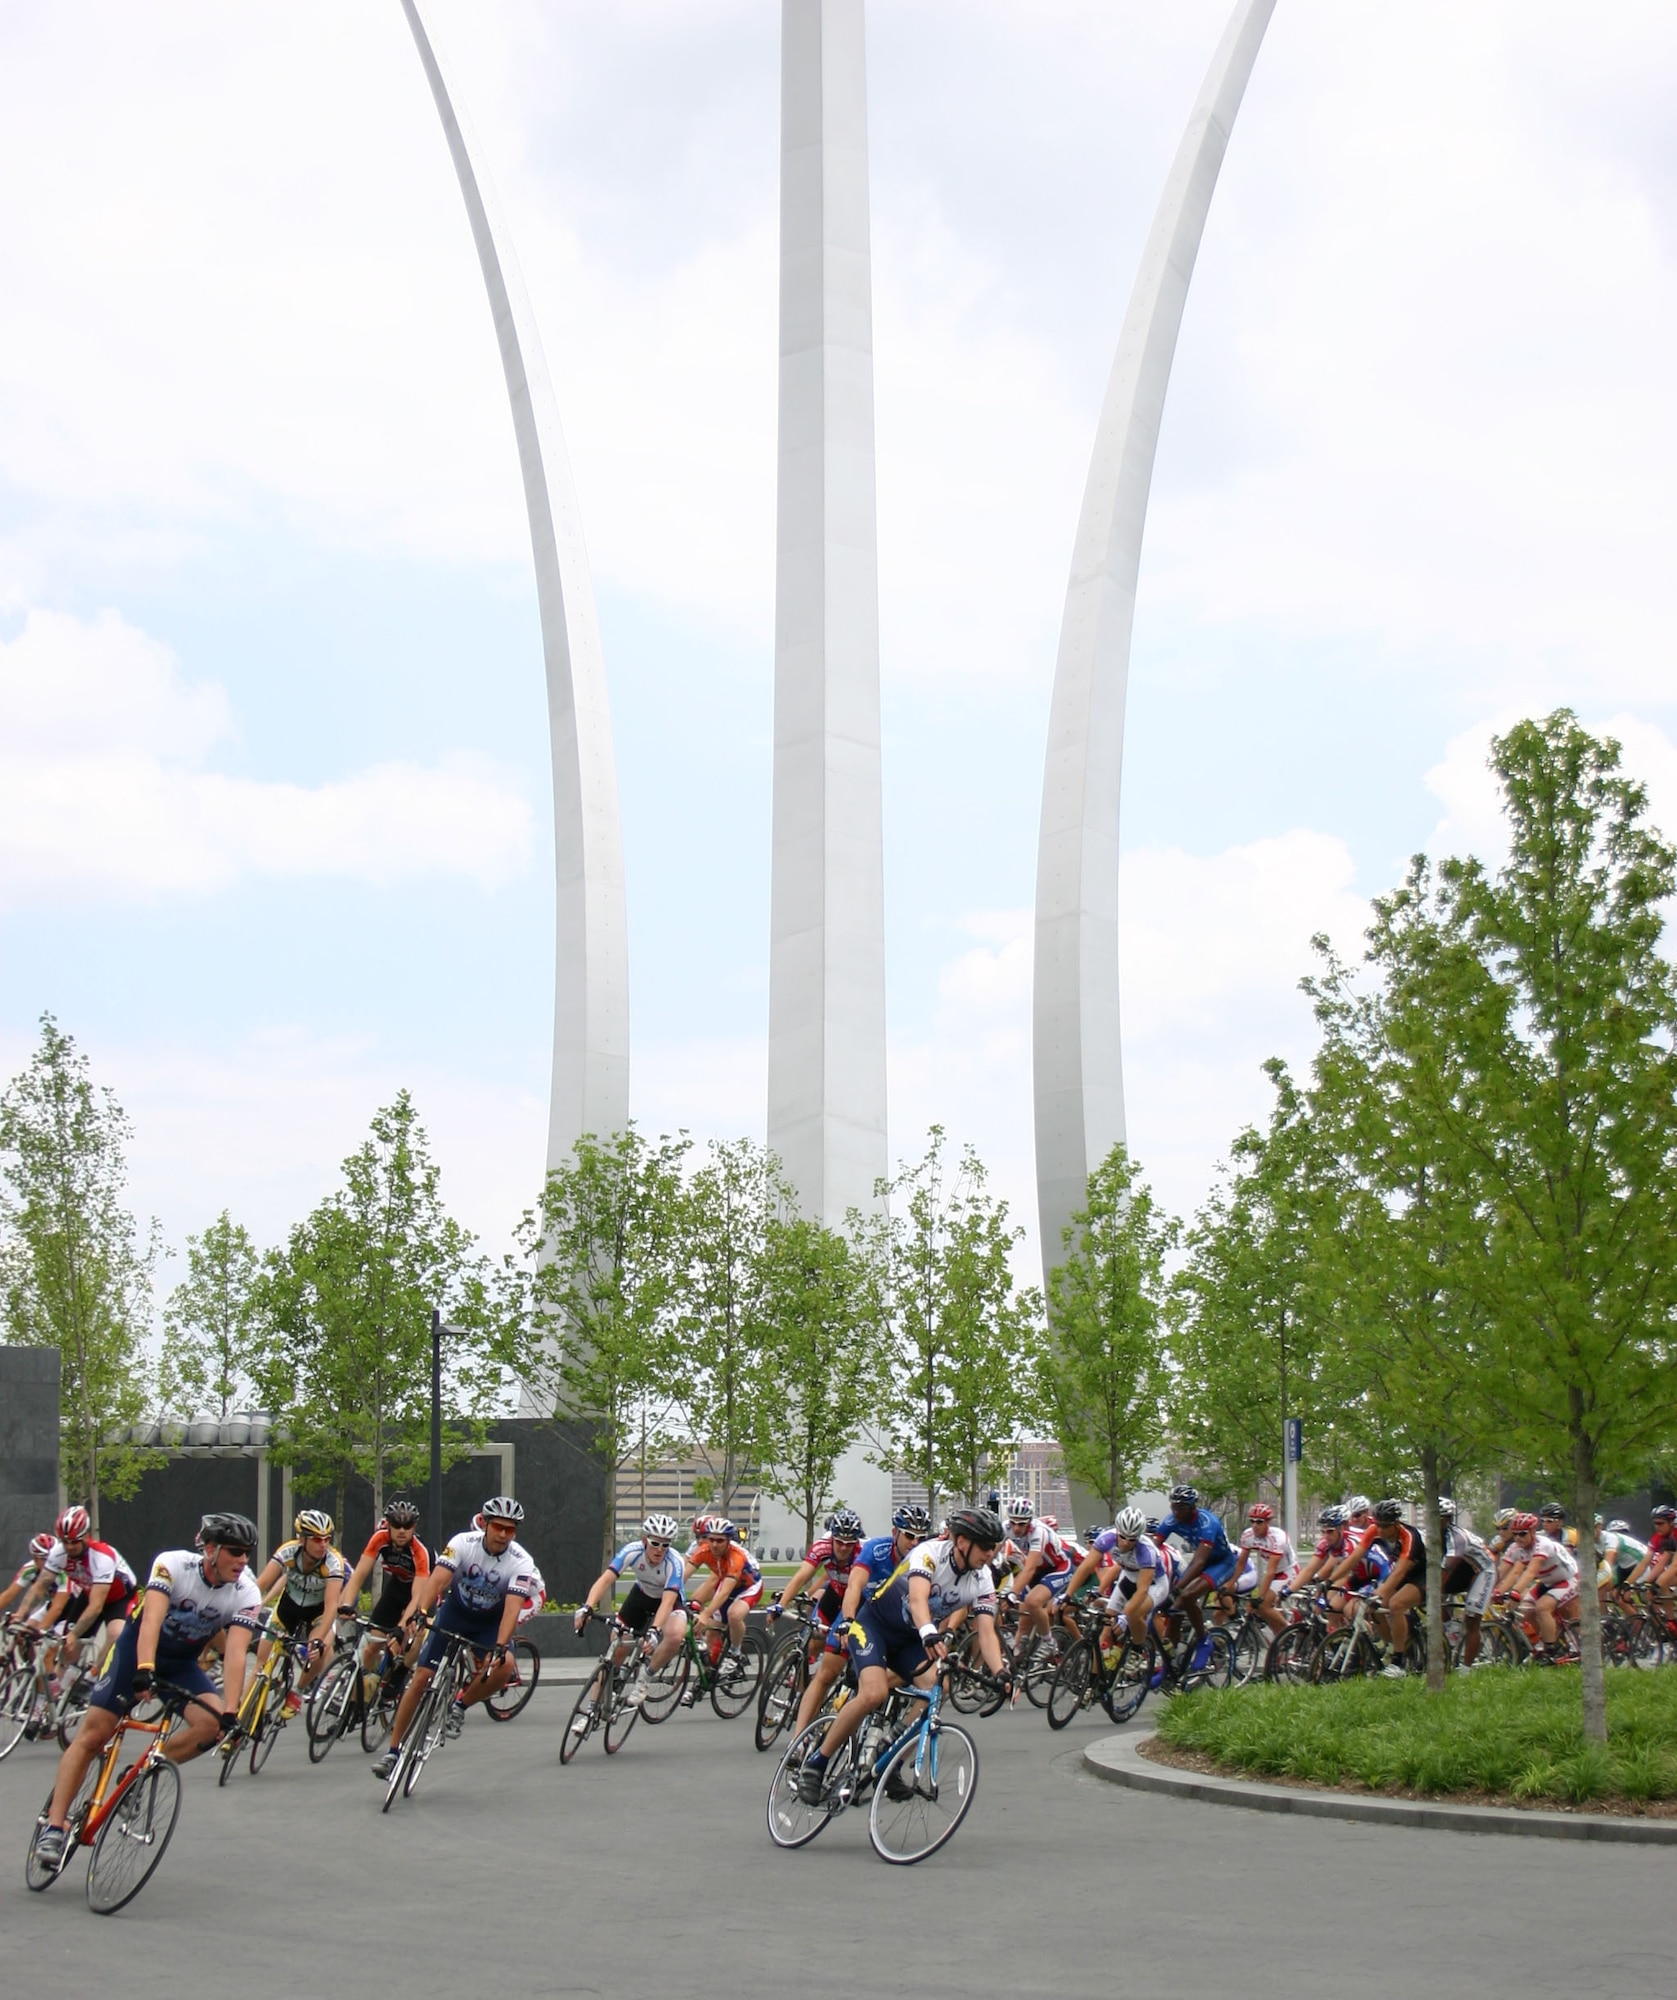 Members of the Air Force cycling team pace the men's pro riders on a parade lap that took them by the Air Force Memorial at Arlington, Va., June 16. The inaugural Crystal City Classic cycling event was presented by the Air Force and plans are in the works for the race to become the Air Force signature sporting event in Washington D.C. (U.S. Air Force photo/Tech. Sgt. Michael Dorsey)